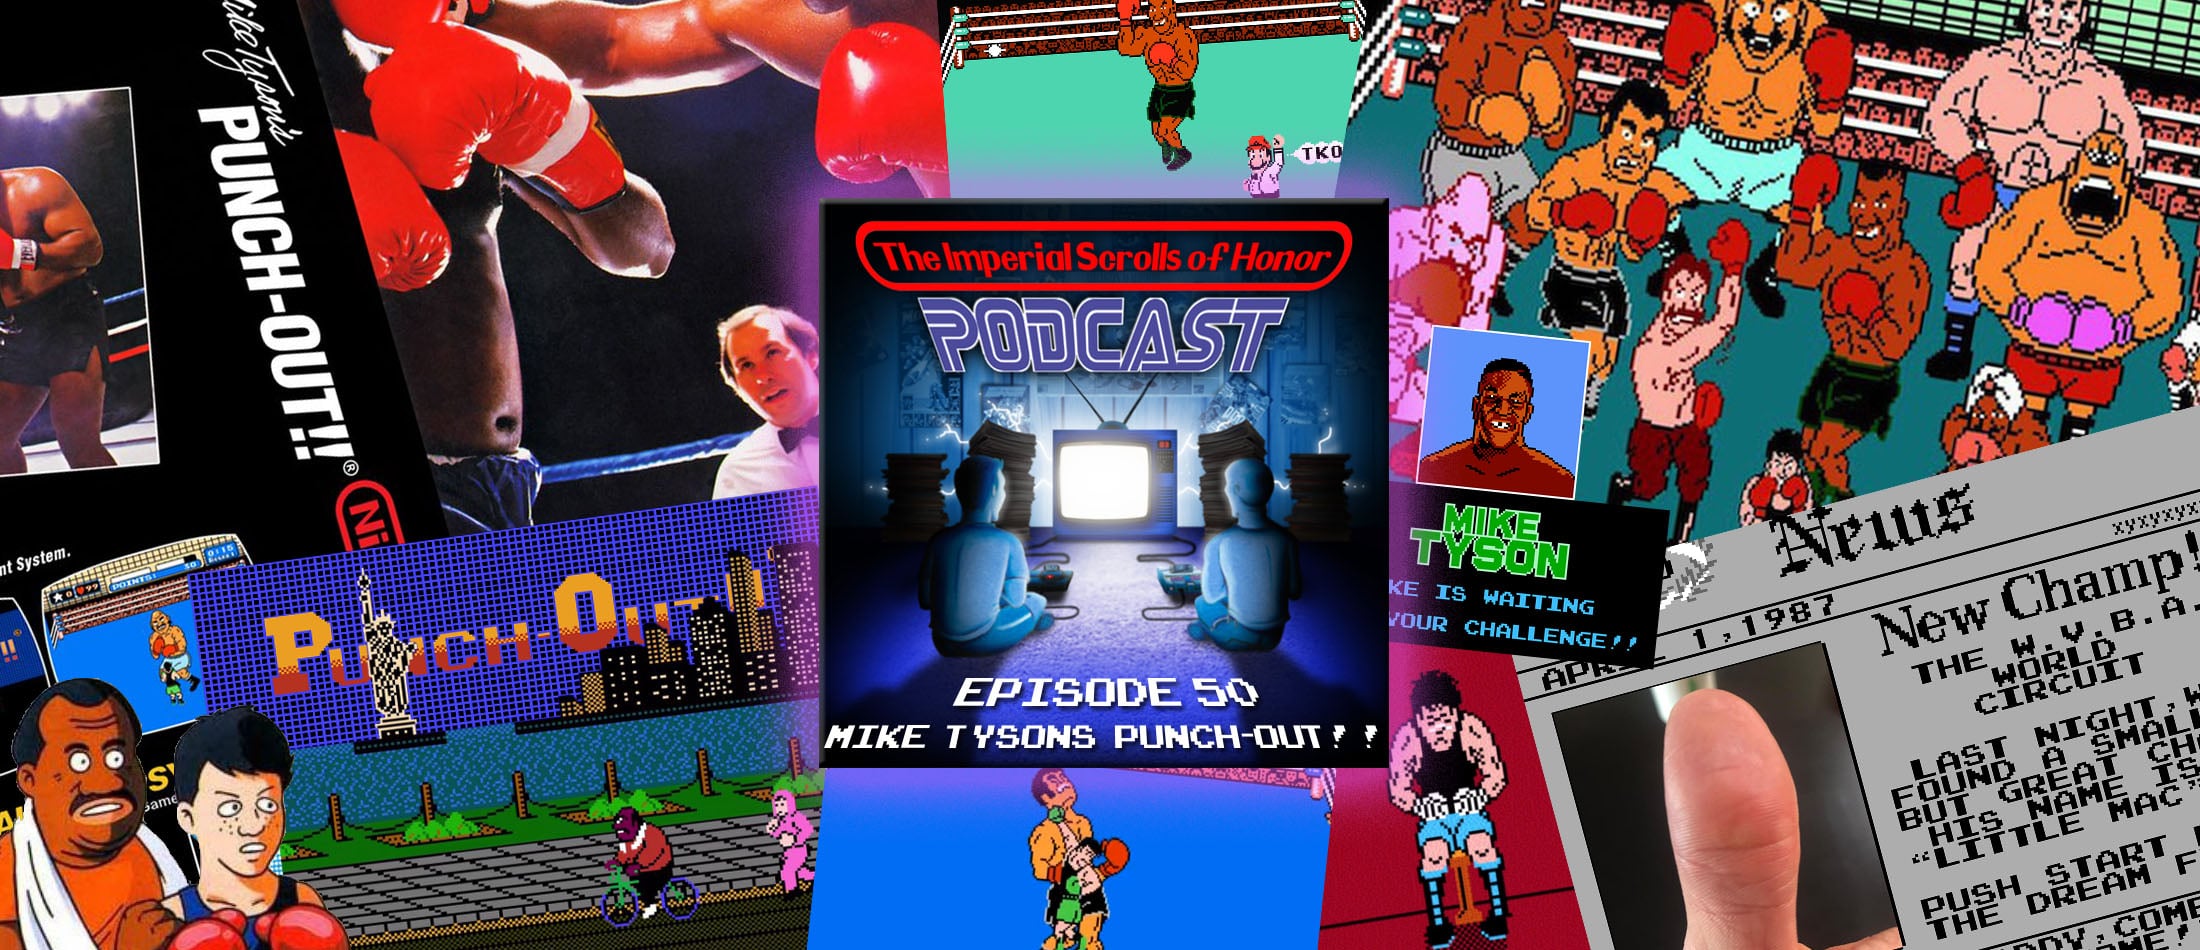 The Imperial Scrolls of Honor Podcast - Ep 50 - Mike Tyson's Punch-Out!! (NES)